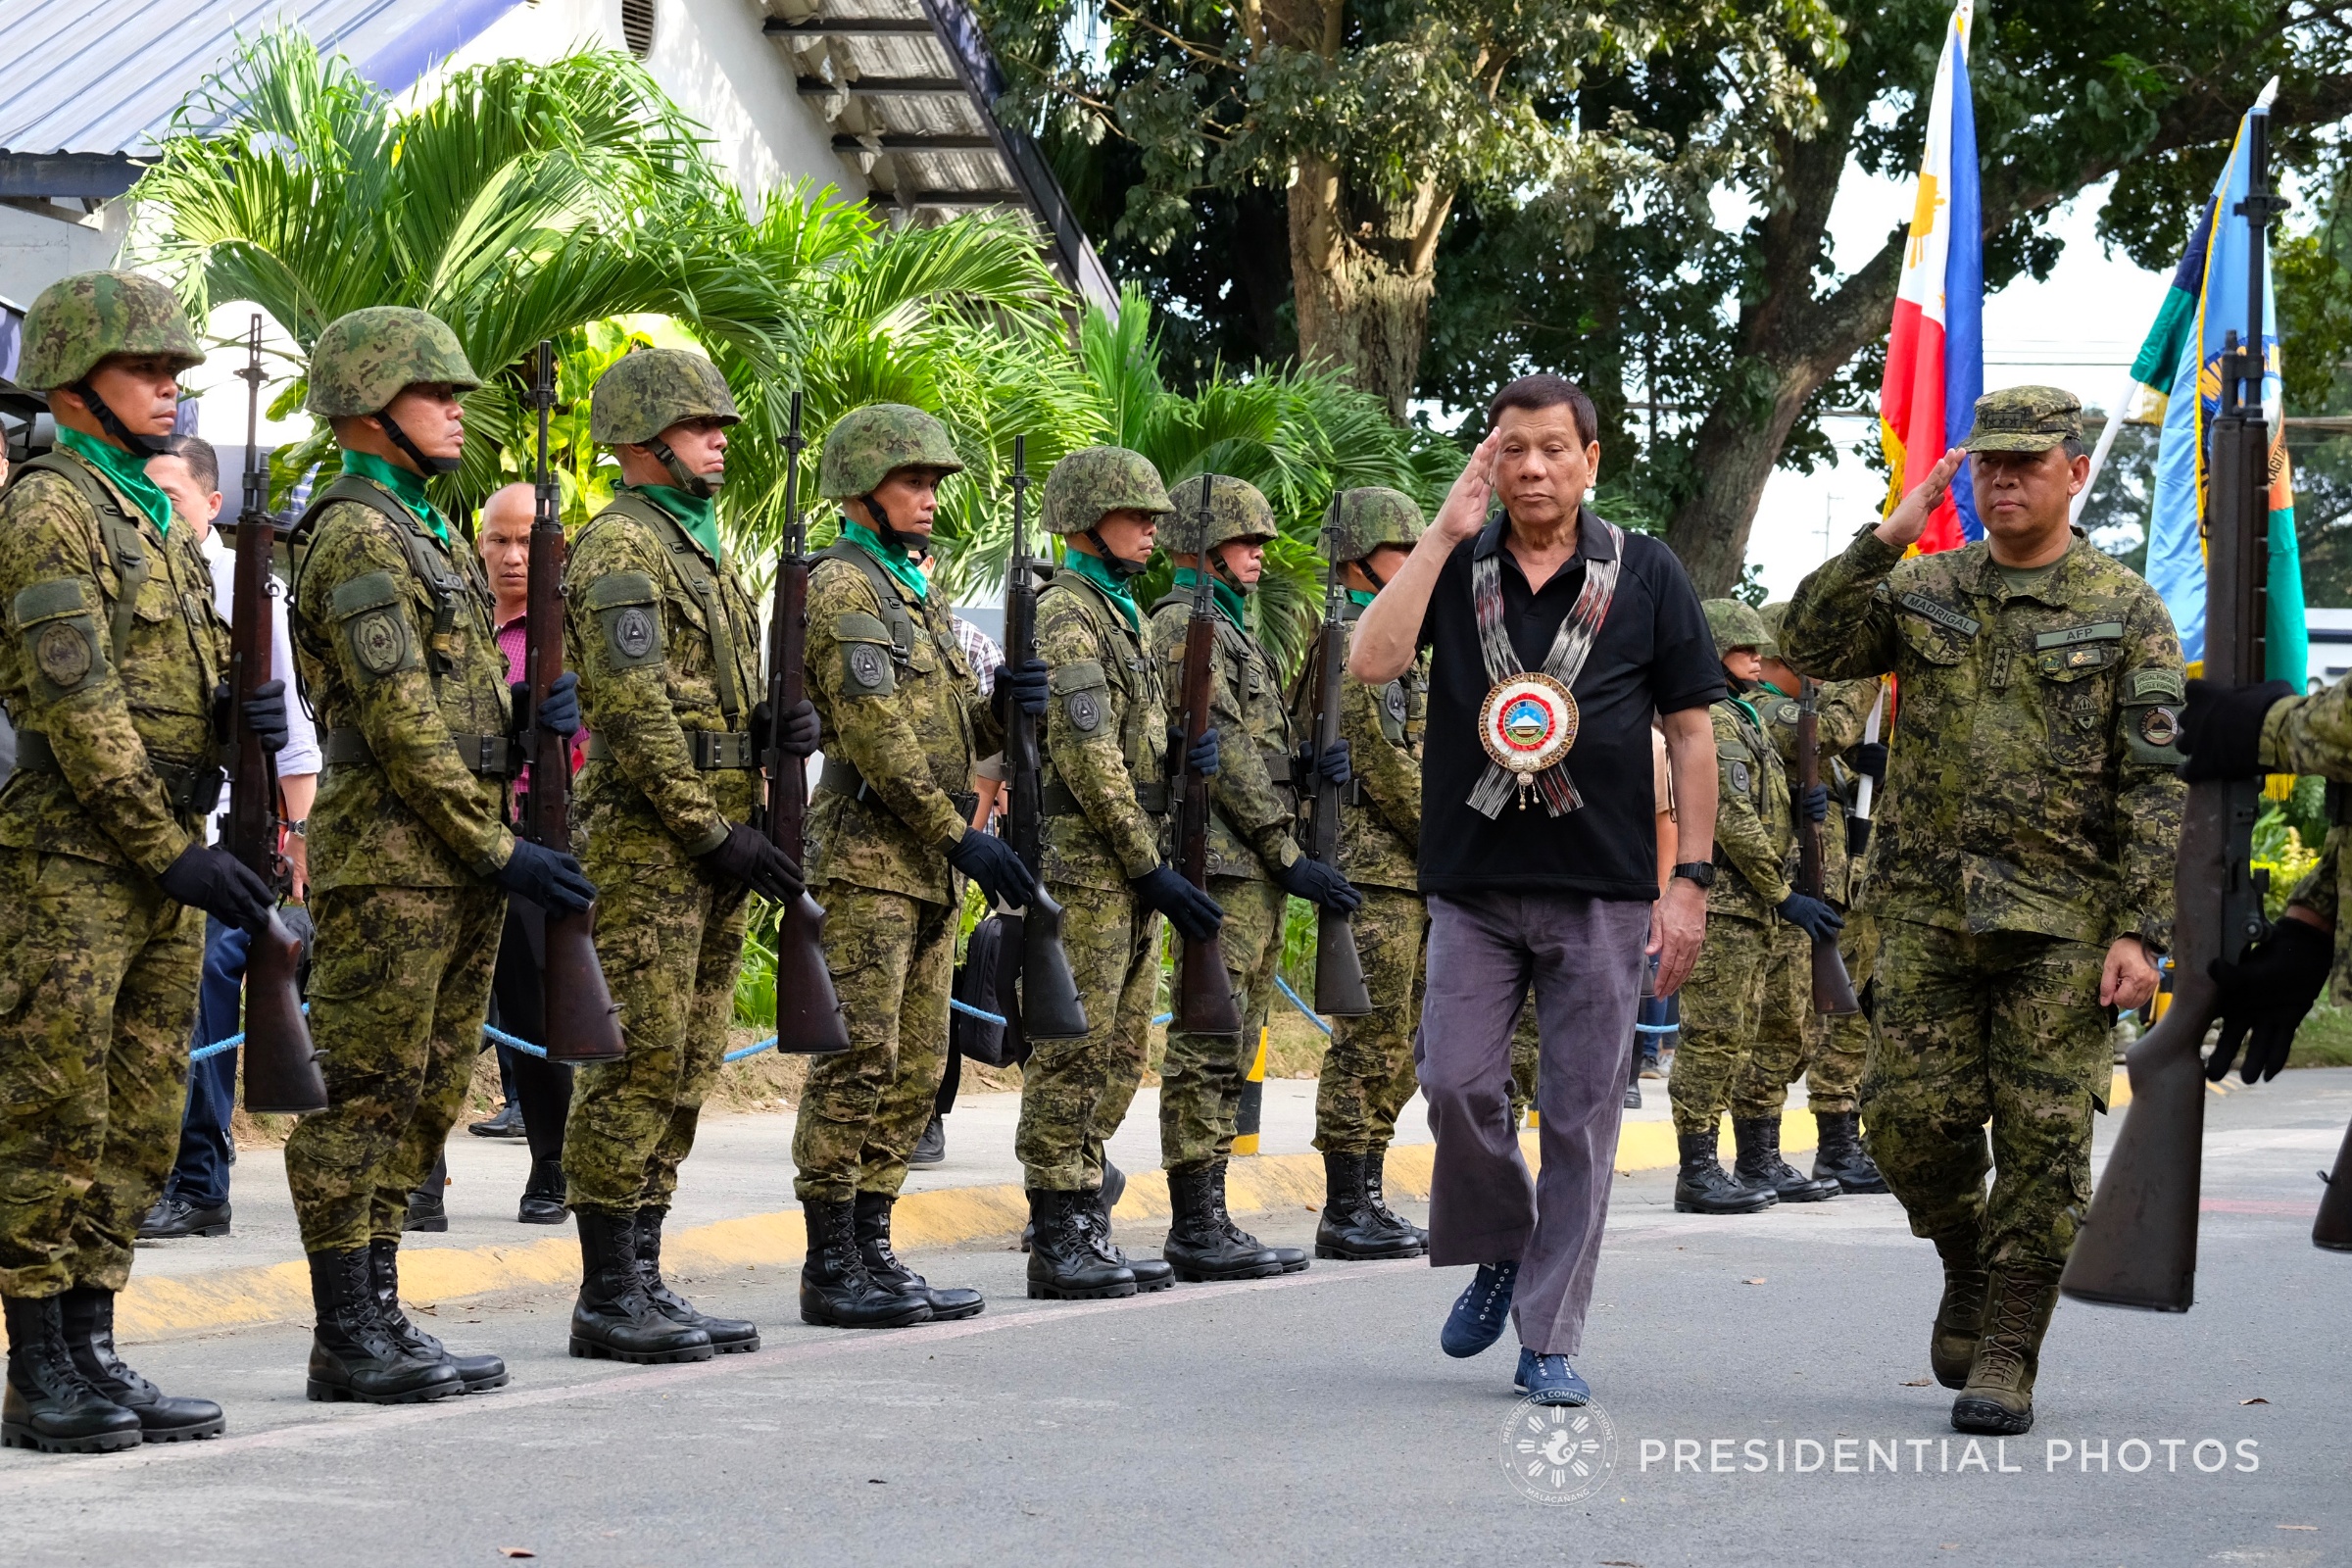 MEETING IP LEADERS. President Rodrigo Duterte arrives at the Naval Station Felix Apolinario in Panacan, Davao City, to attend the Indigenous Peoples Leaders' Summit on February 1, 2018. Malacañang photo 